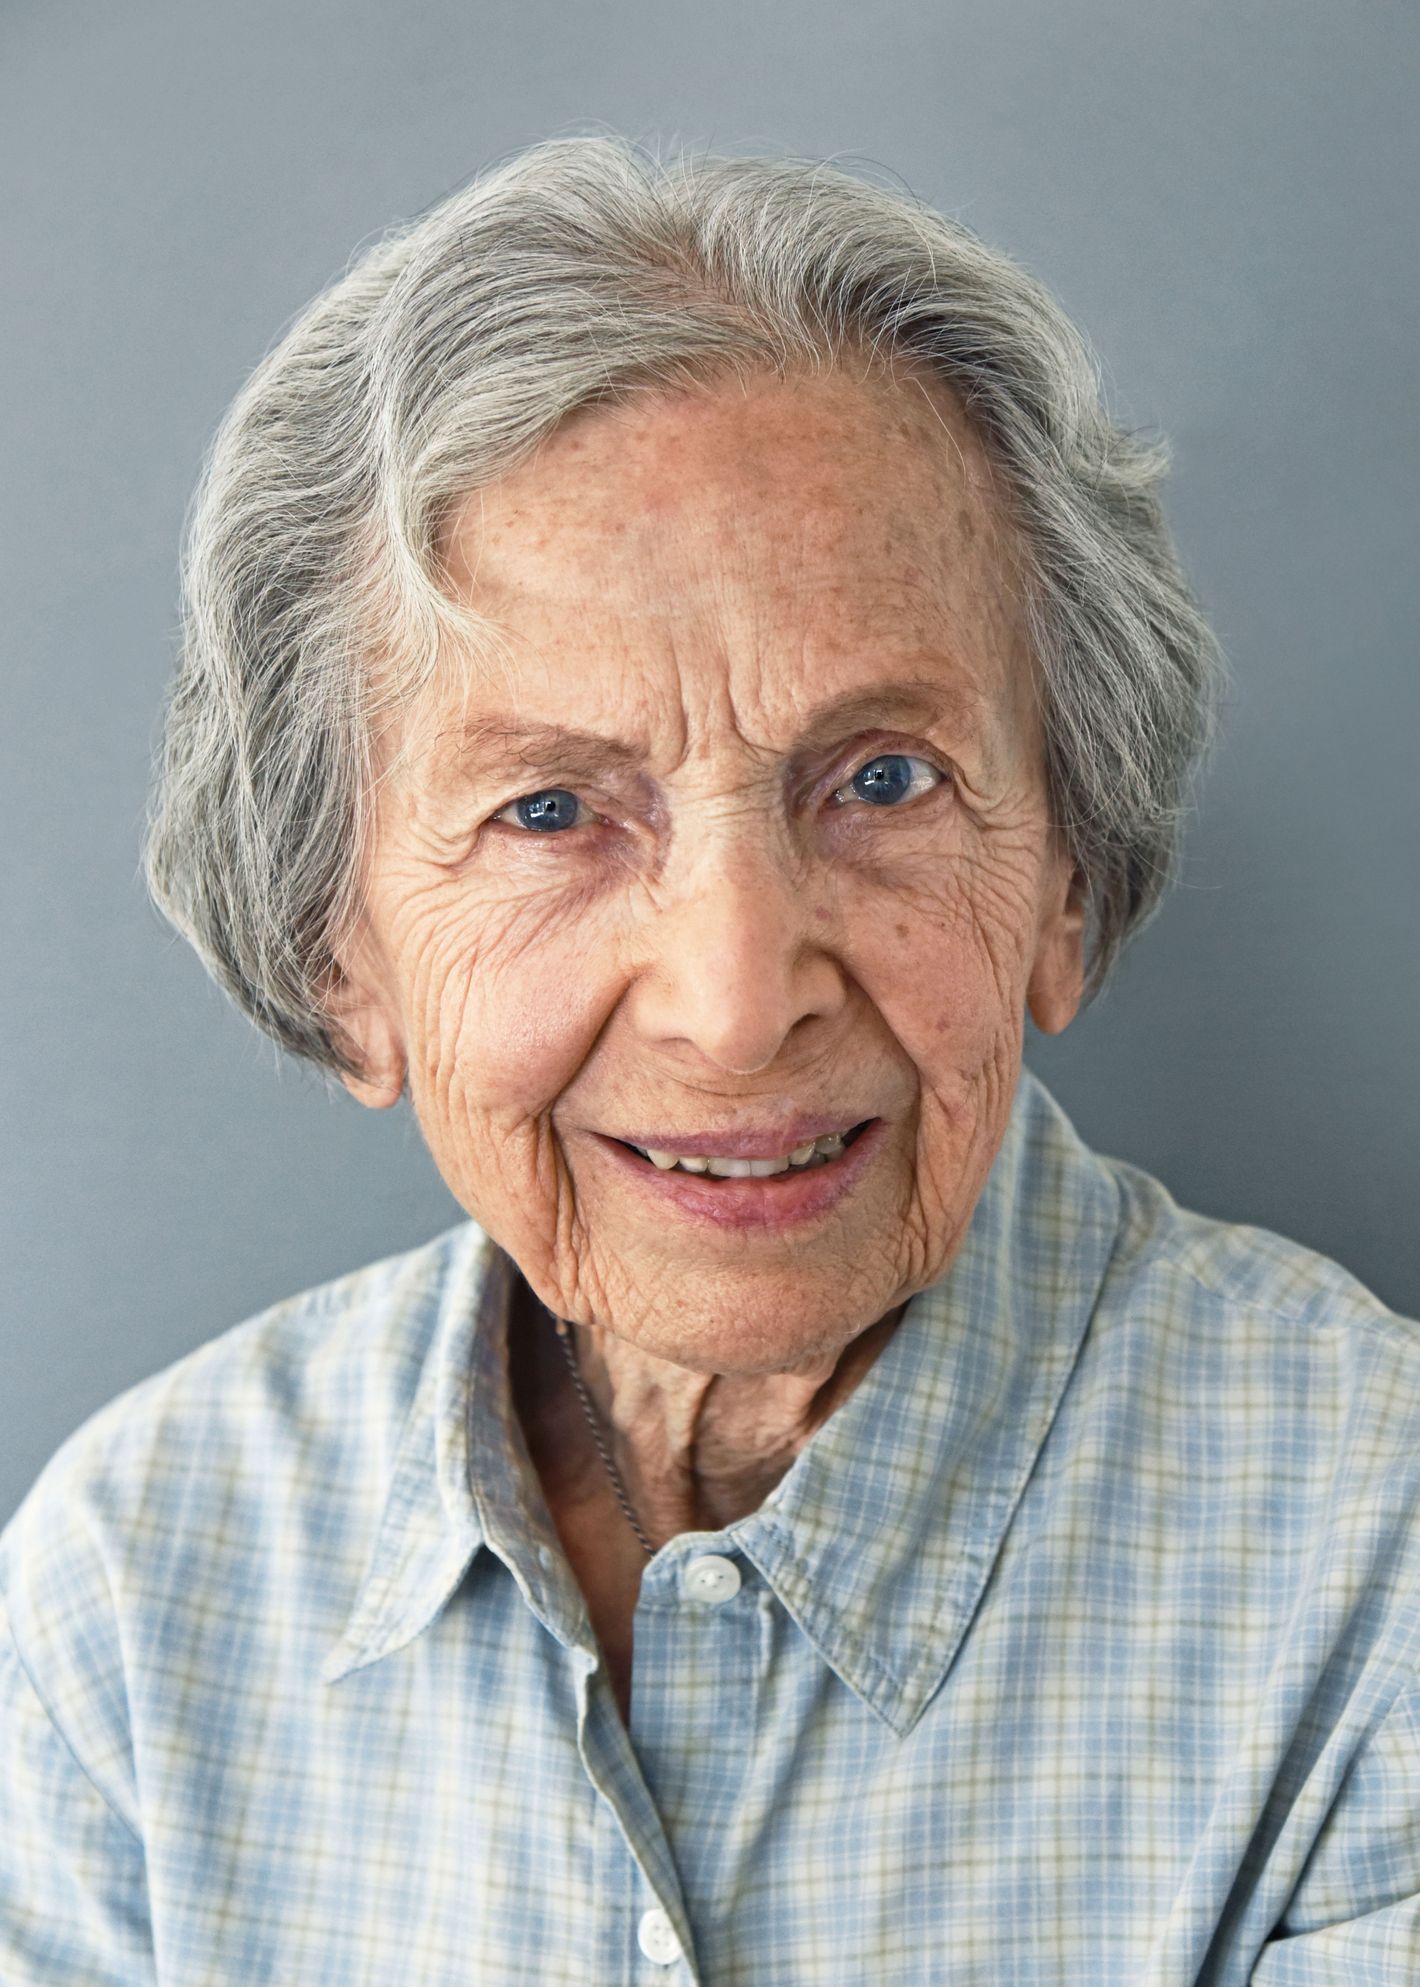 Photos Portraits Of Women Over 100 From ‘aging Gracefully